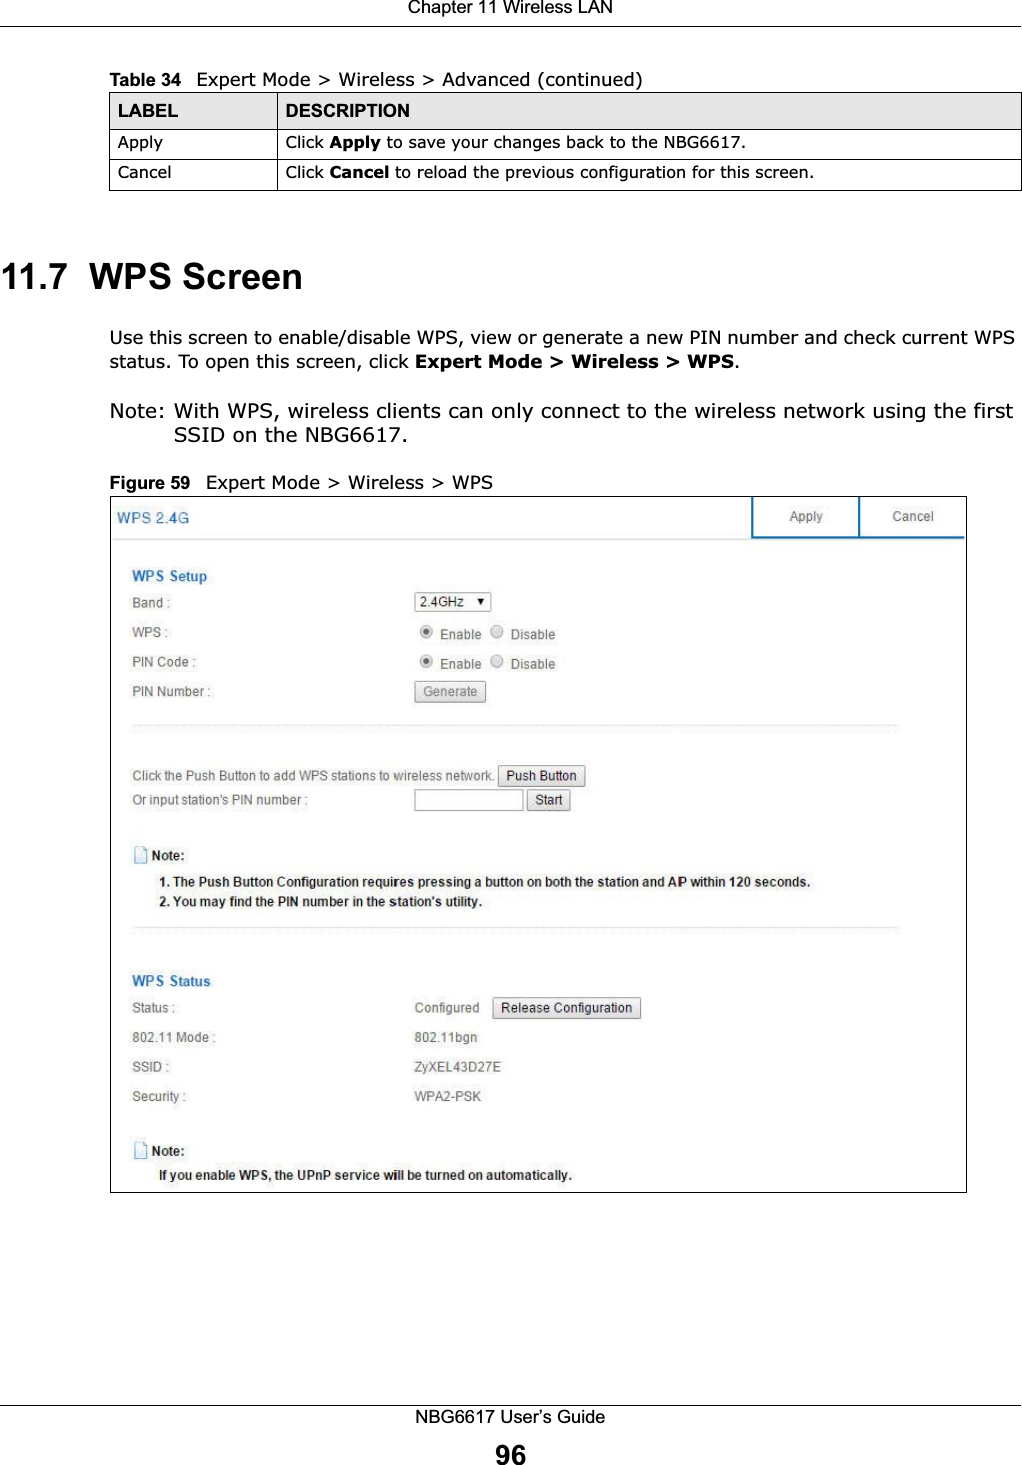 Chapter 11 Wireless LANNBG6617 User’s Guide9611.7  WPS ScreenUse this screen to enable/disable WPS, view or generate a new PIN number and check current WPS status. To open this screen, click Expert Mode &gt; Wireless &gt; WPS.Note: With WPS, wireless clients can only connect to the wireless network using the first SSID on the NBG6617.Figure 59   Expert Mode &gt; Wireless &gt; WPSApply Click Apply to save your changes back to the NBG6617.Cancel Click Cancel to reload the previous configuration for this screen.Table 34   Expert Mode &gt; Wireless &gt; Advanced (continued)LABEL DESCRIPTION